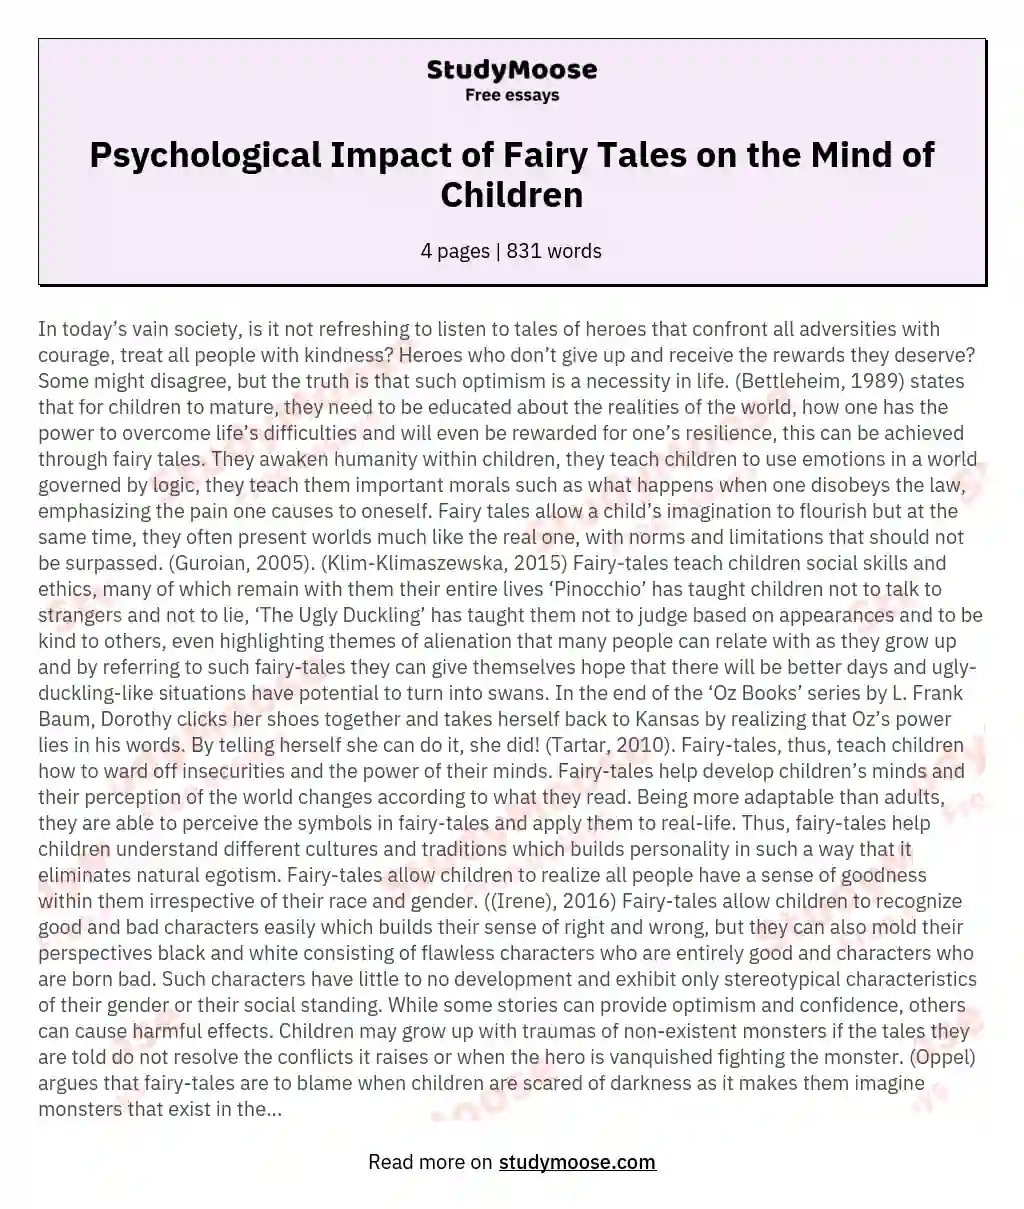 Psychological Impact of Fairy Tales on the Mind of Children